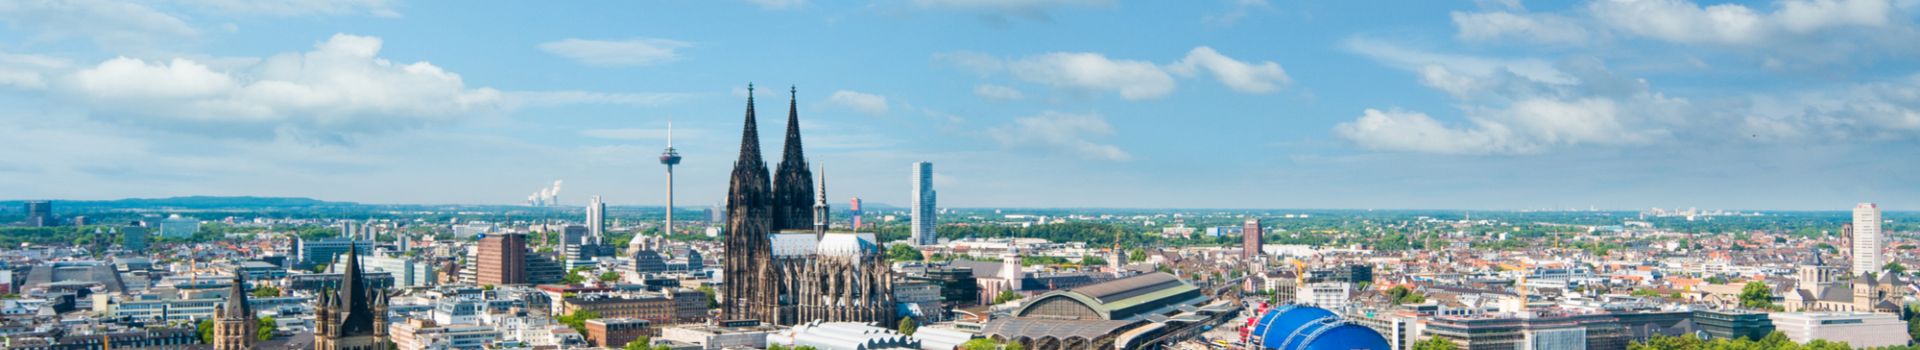 Holidays to Cologne | Book Flights & Hotel | Cassidy Travel